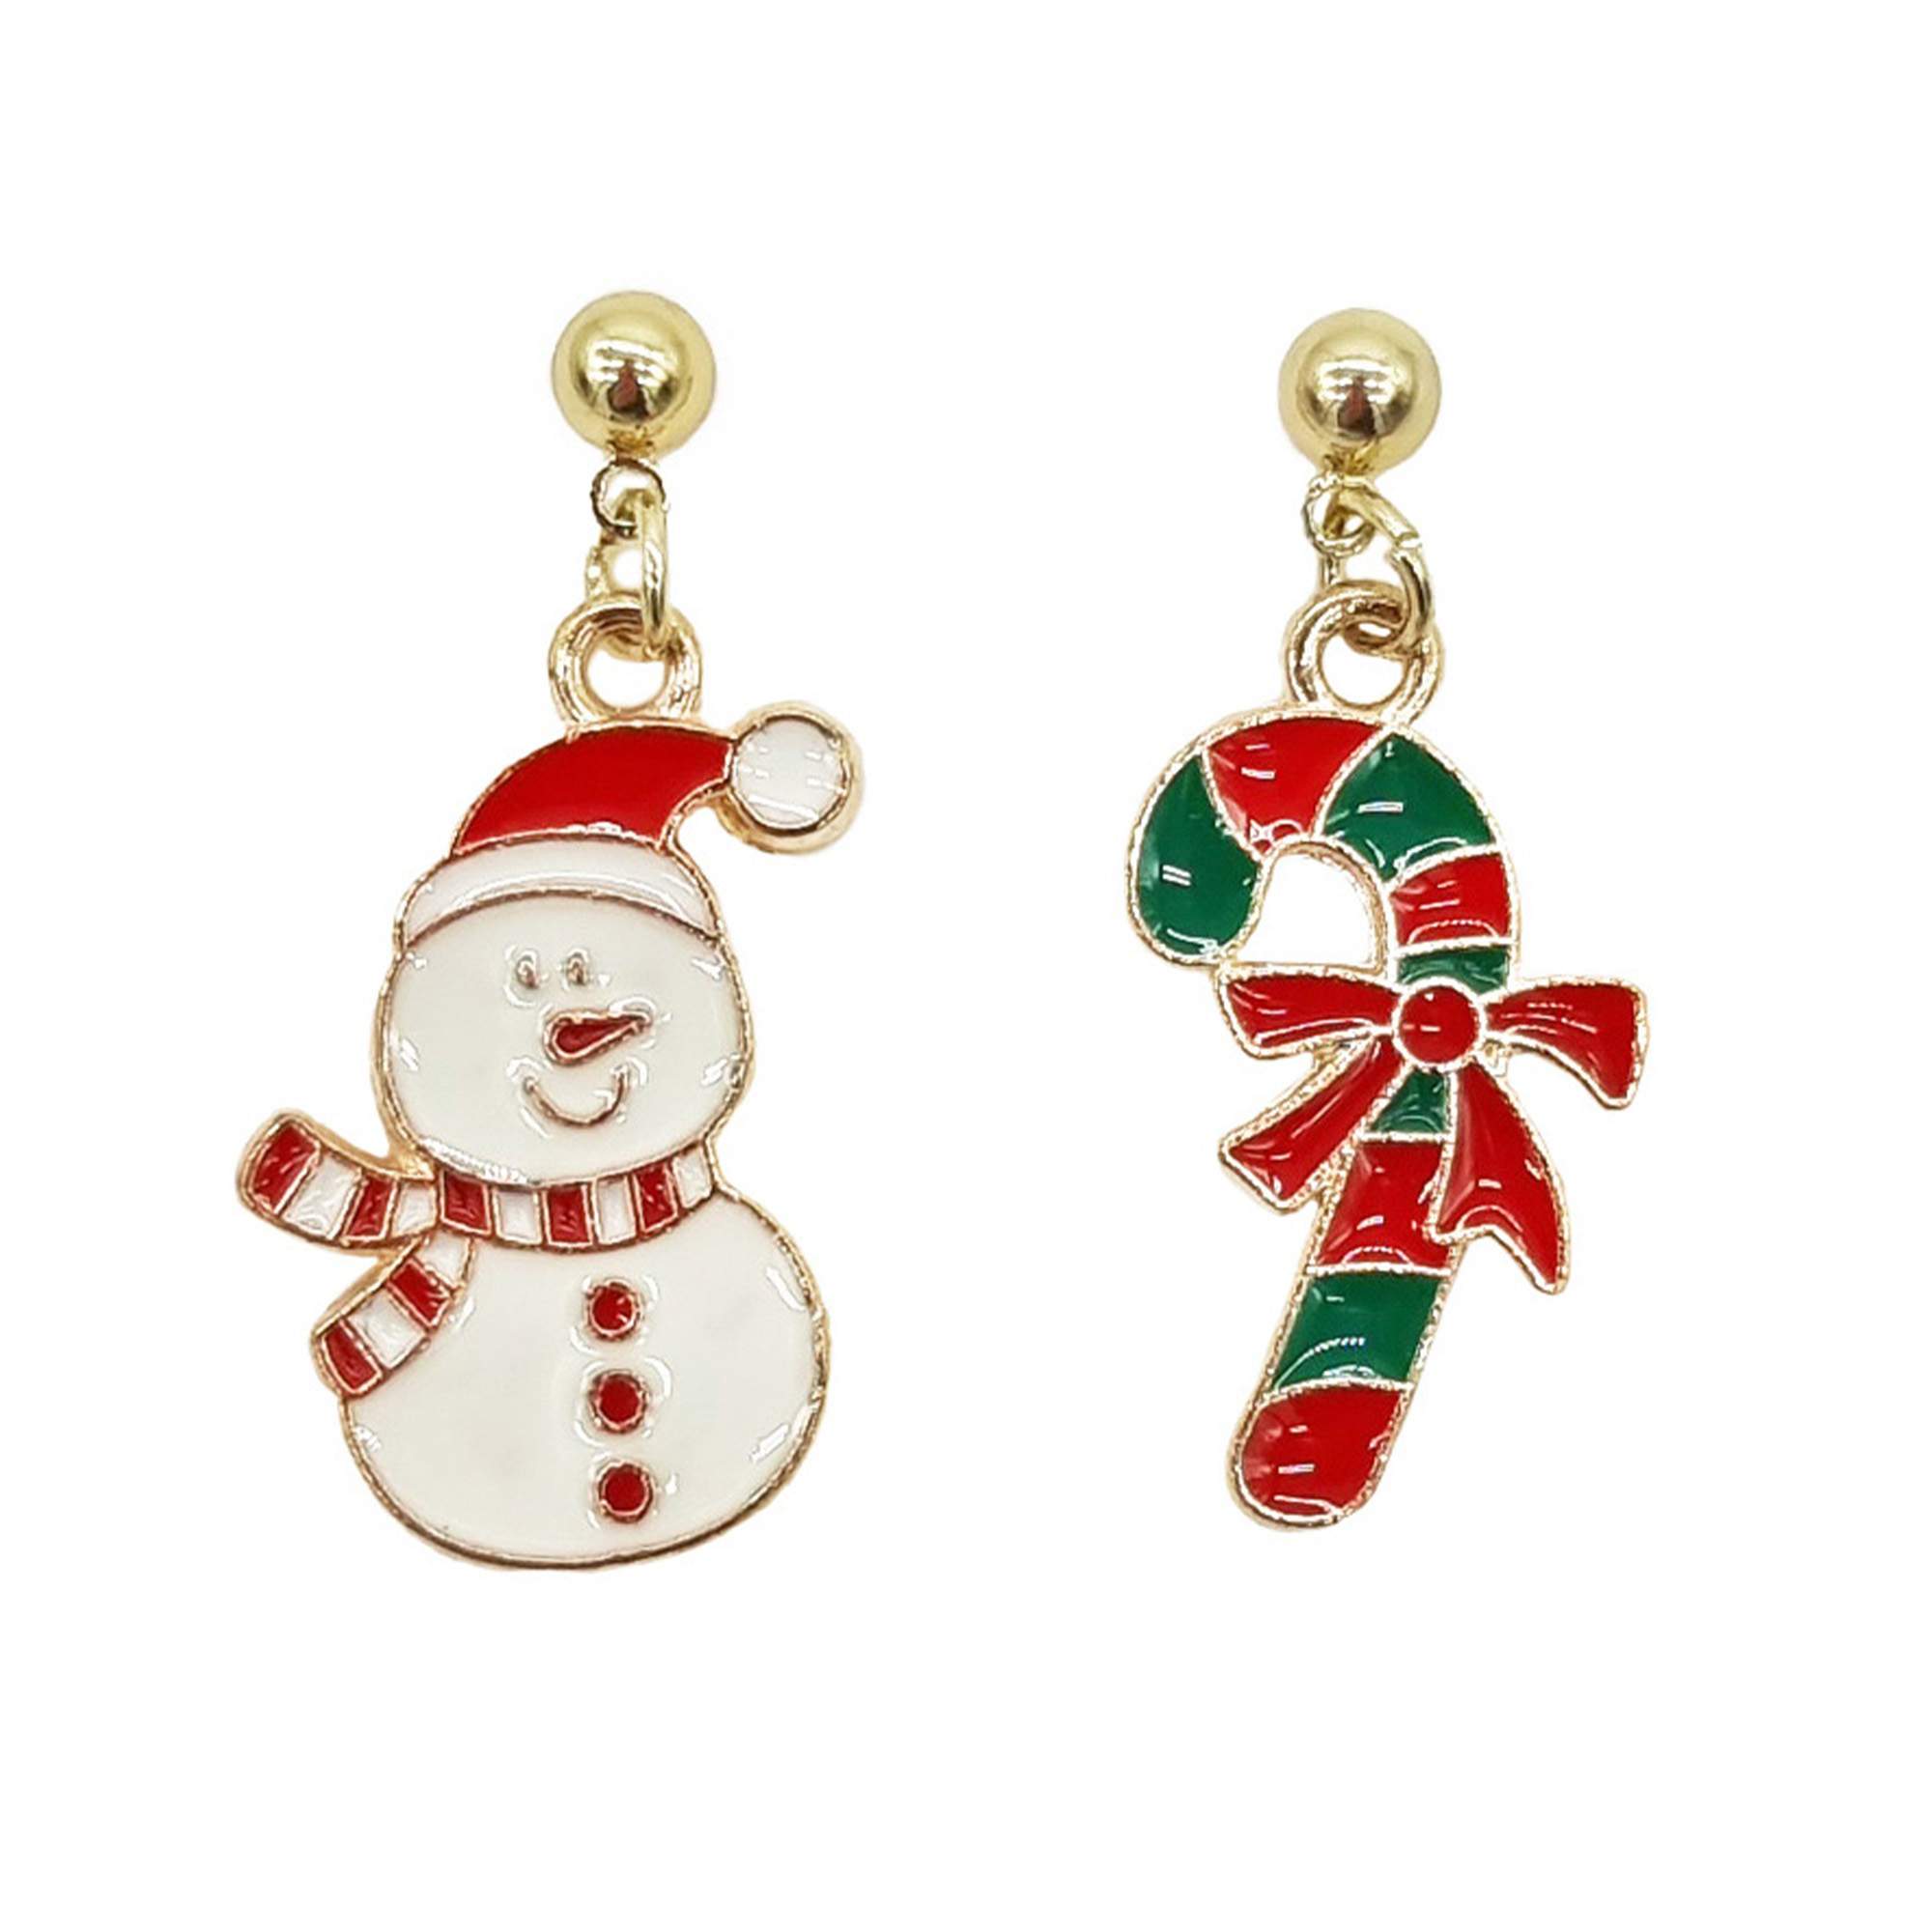 Snowman and Candy cane